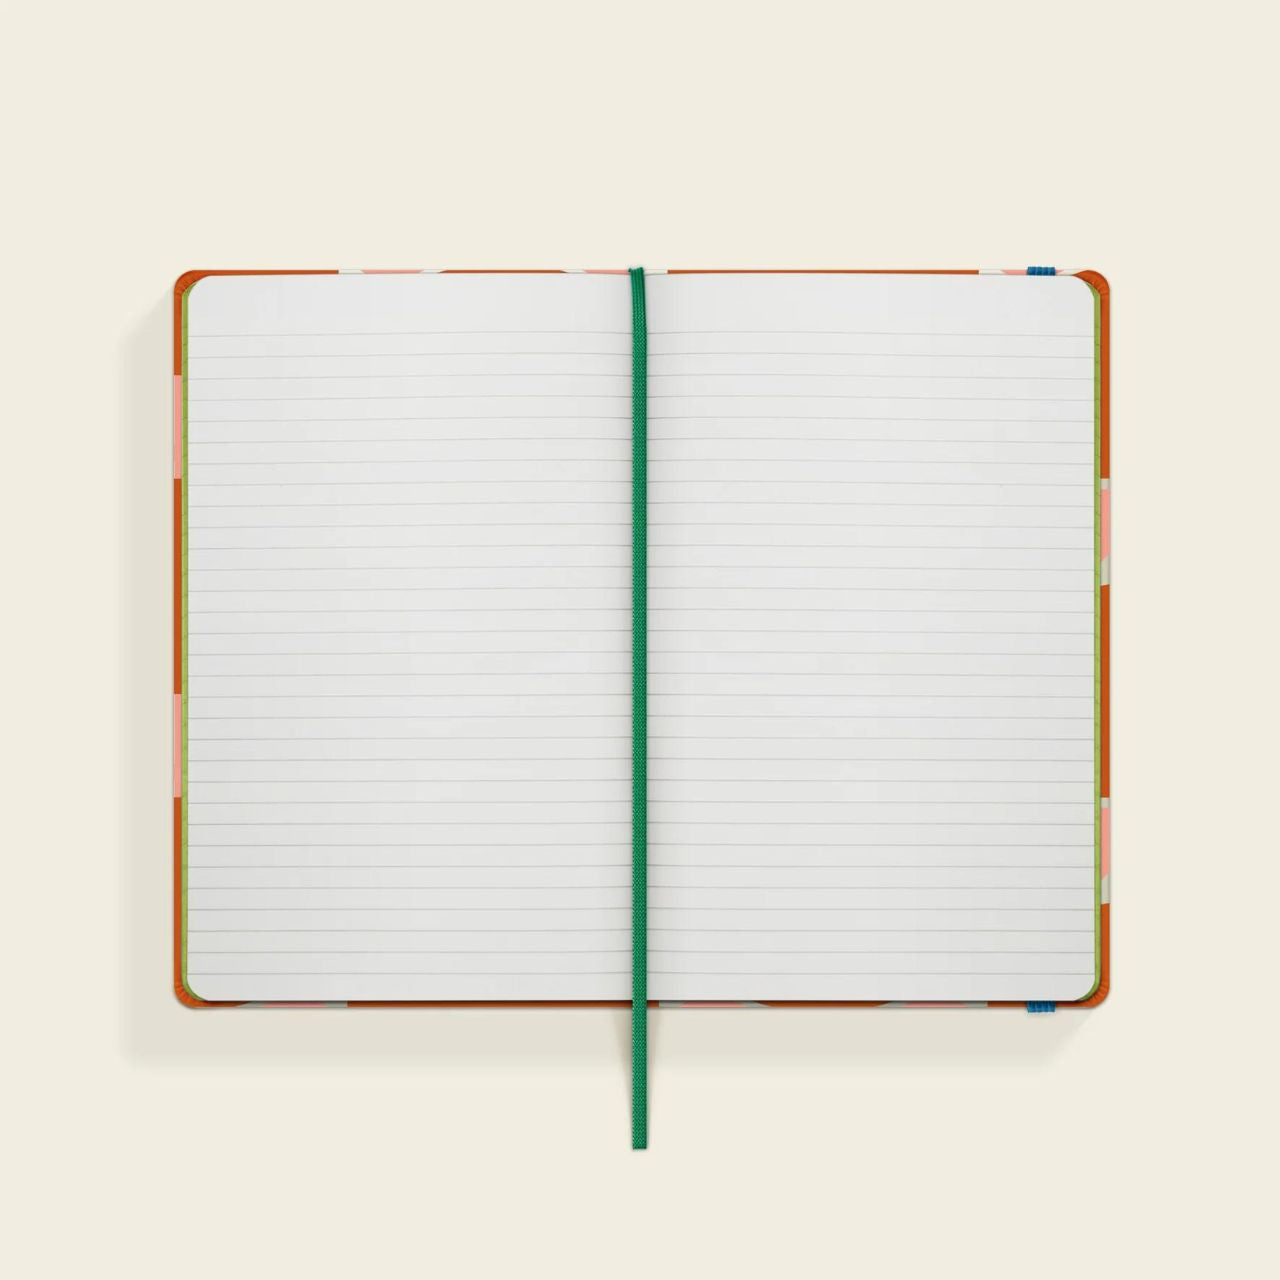 Orla Kiely Block Tulip Small Notebook  Write down your goals, plans and your weekly shopping list in style with our Block Flowers notebook. This notebook has a hardcover with rounded corners, an elastic closure and matching ribbon bookmark. Comes with a lined paper layout and expandable inner back pocket.